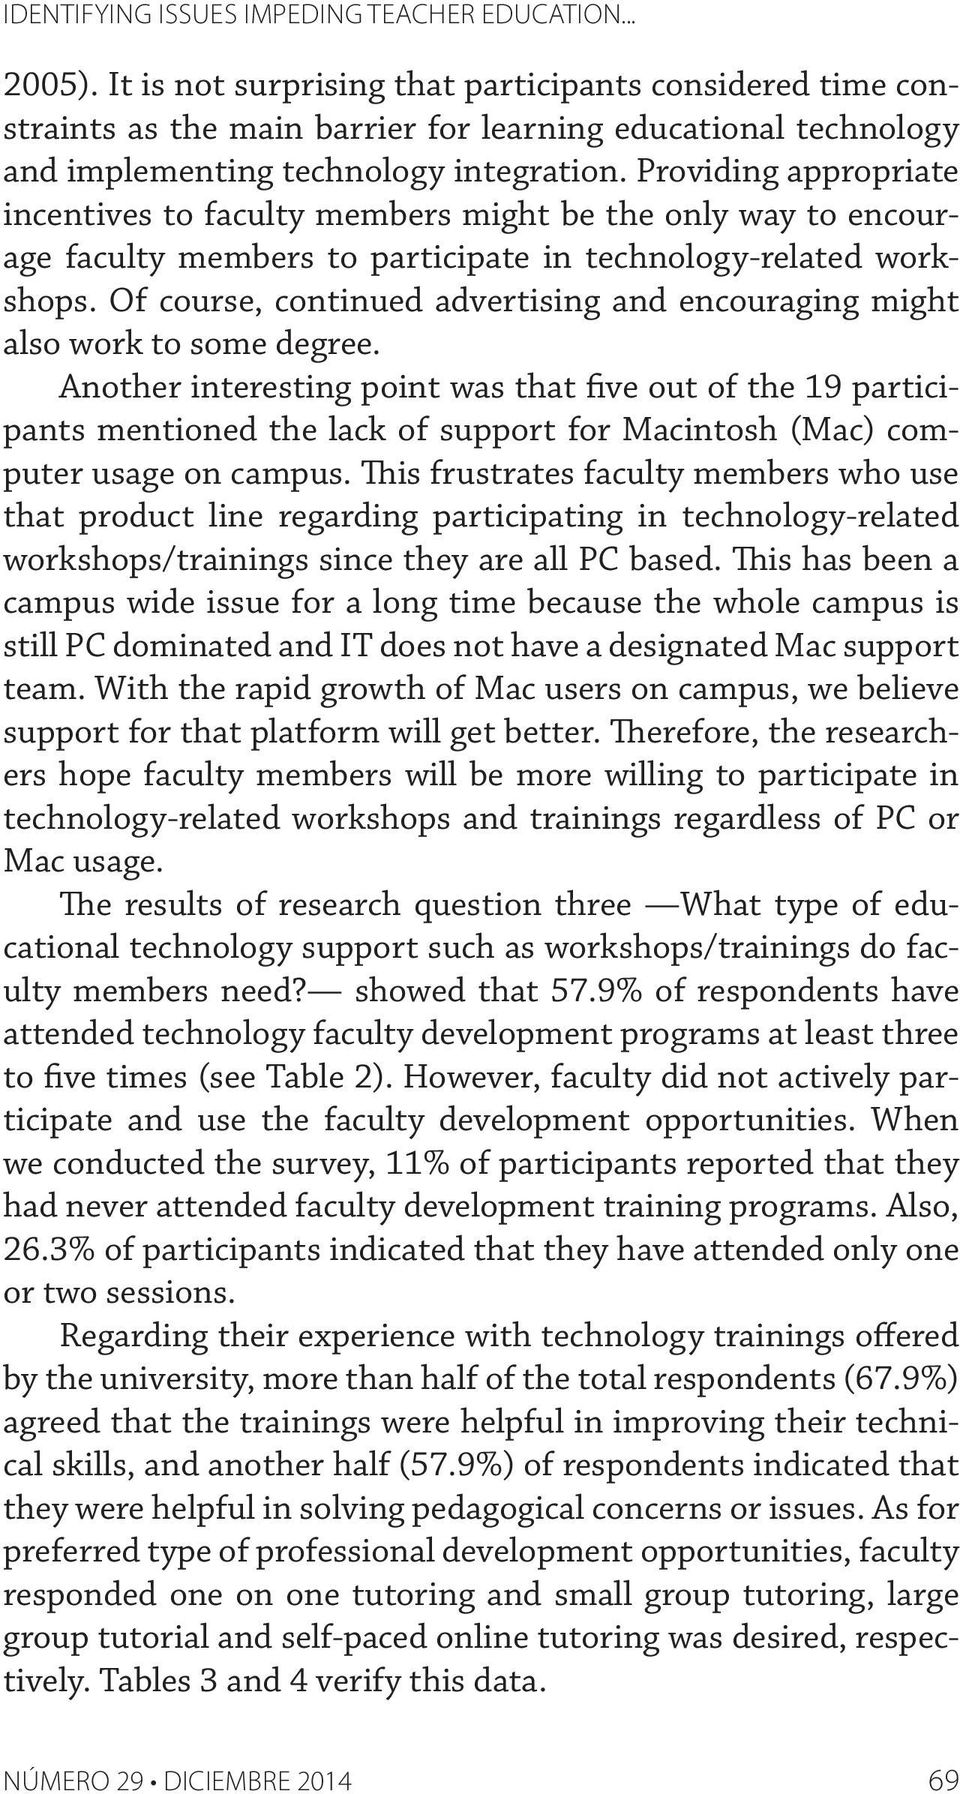 Providing appropriate incentives to faculty members might be the only way to encourage faculty members to participate in technology-related workshops.